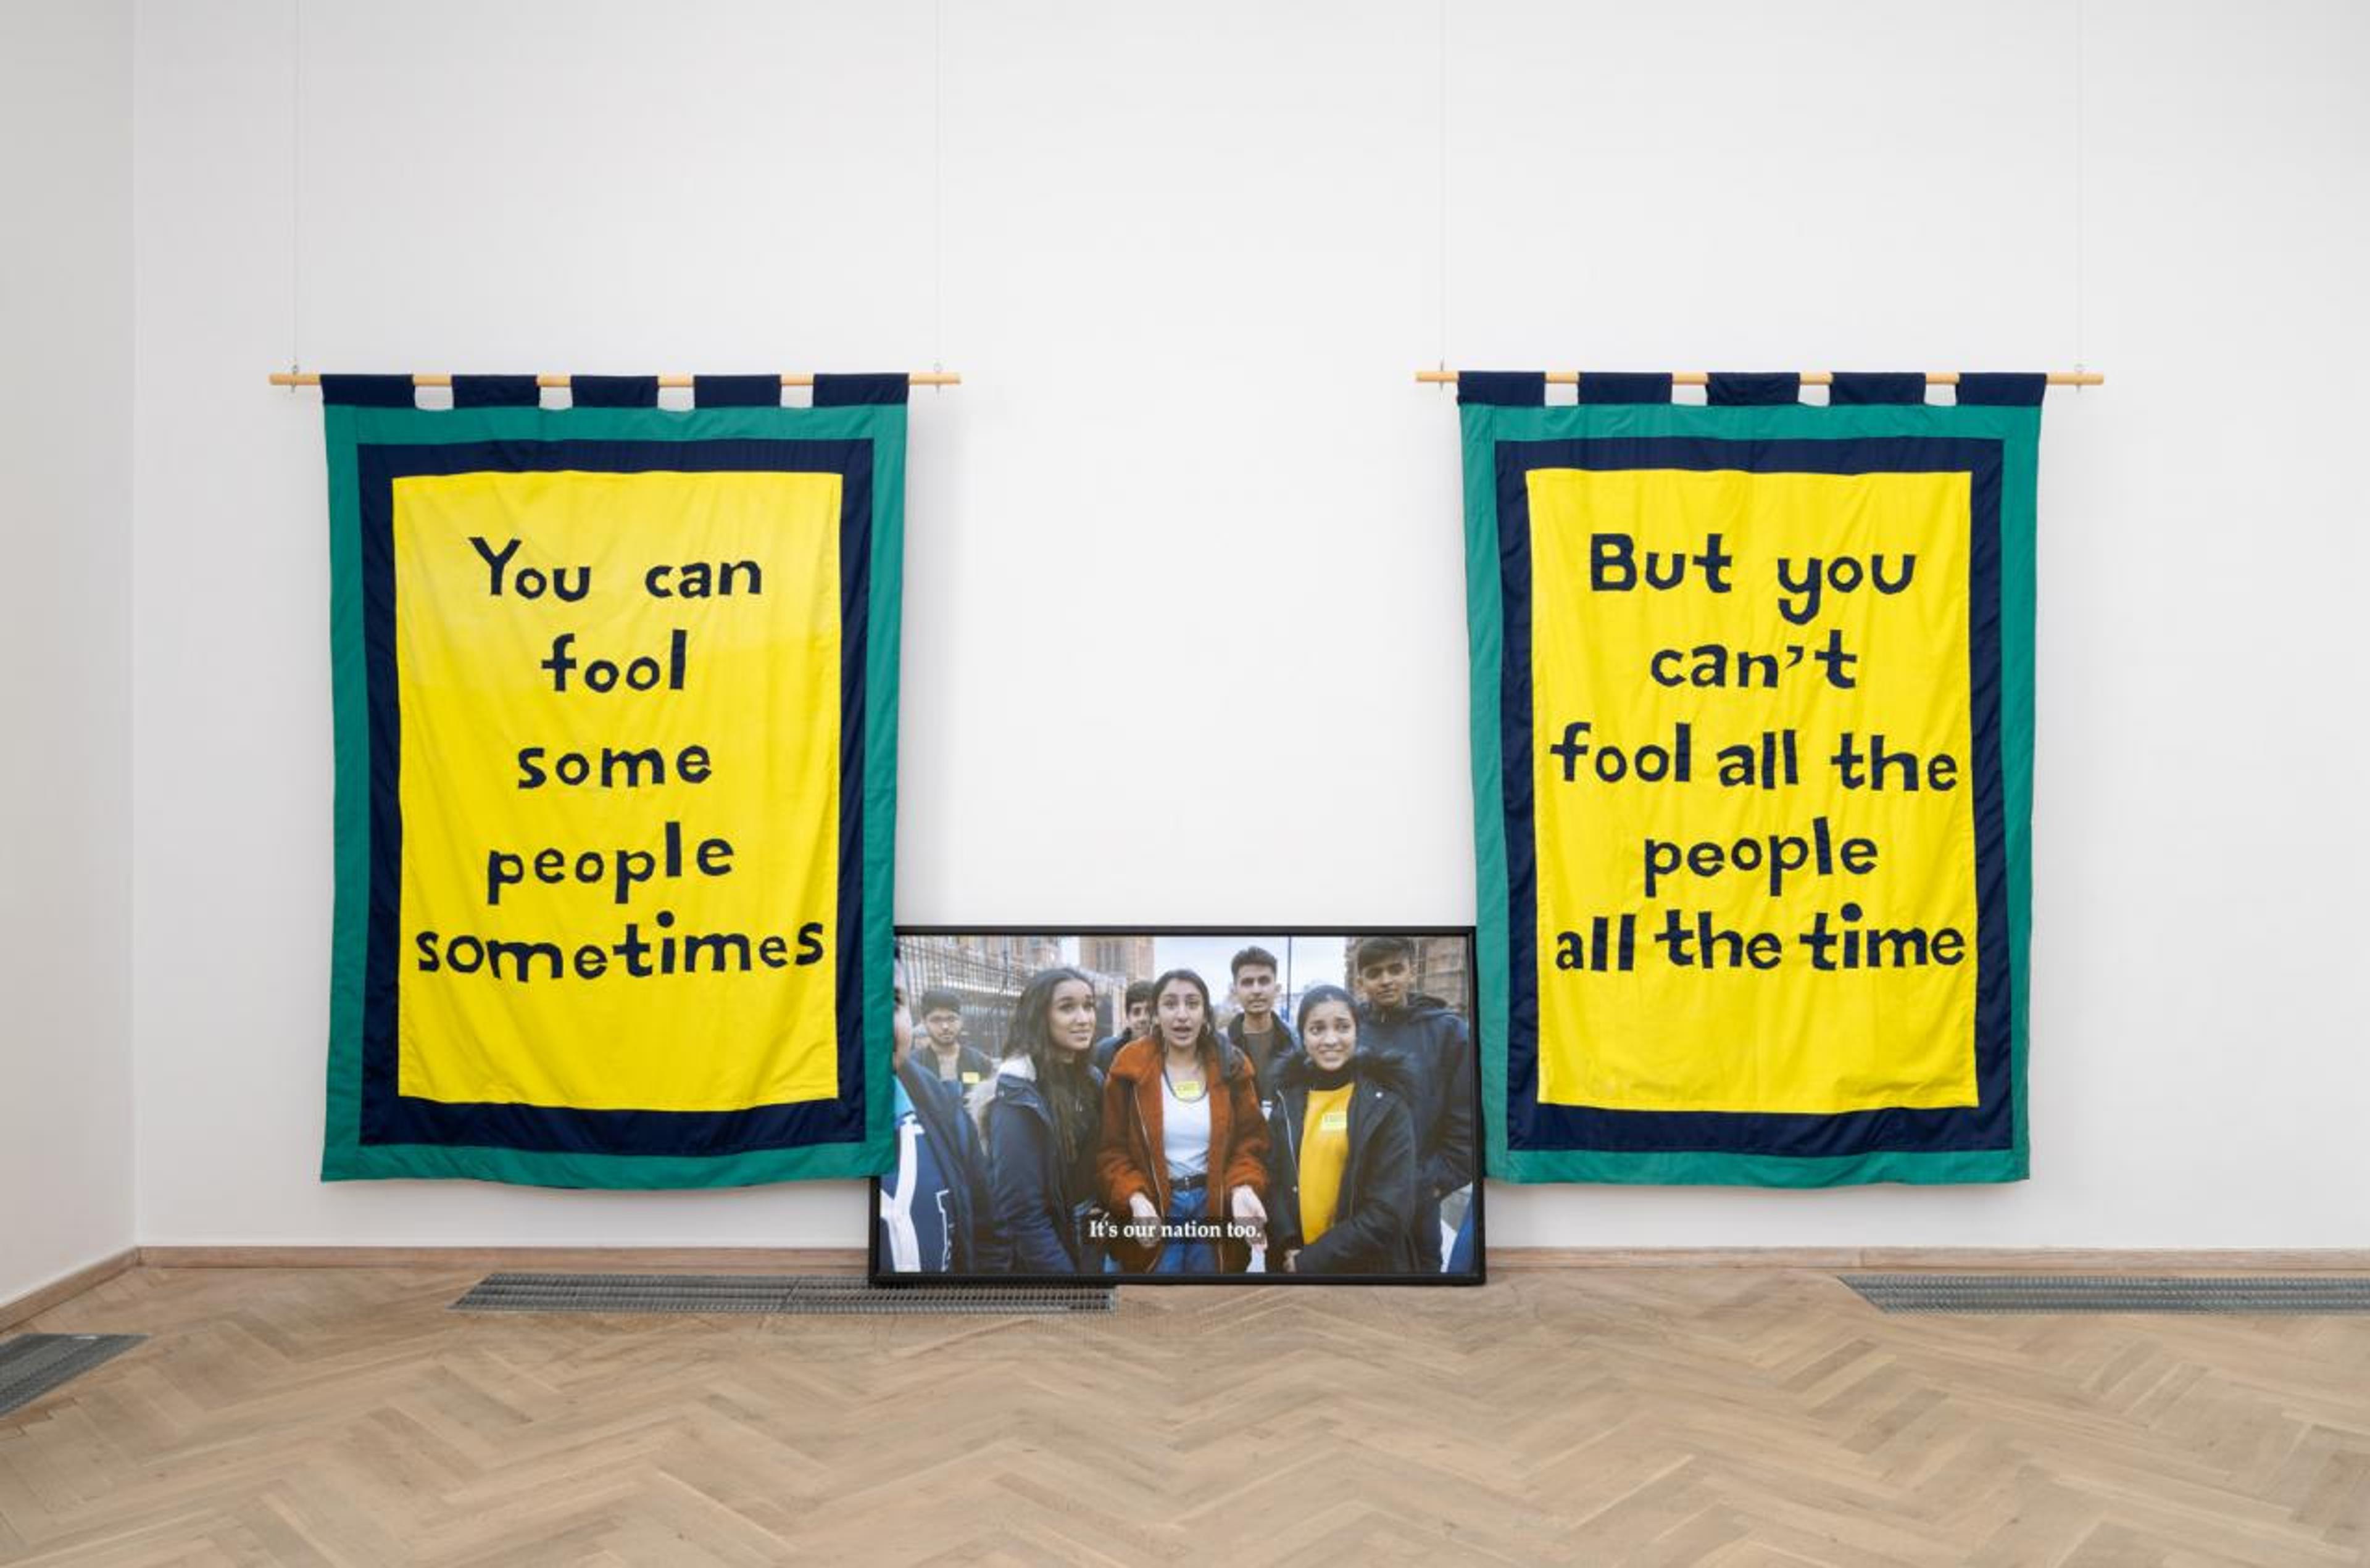 Jeremy Deller, You can fool some people sometimes, 2019; But you can’t fool all the people all the time, 2019; and Putin’s Happy, 2019. Installation view, Kunsthal Charlottenborg, Copenhagen, 2023